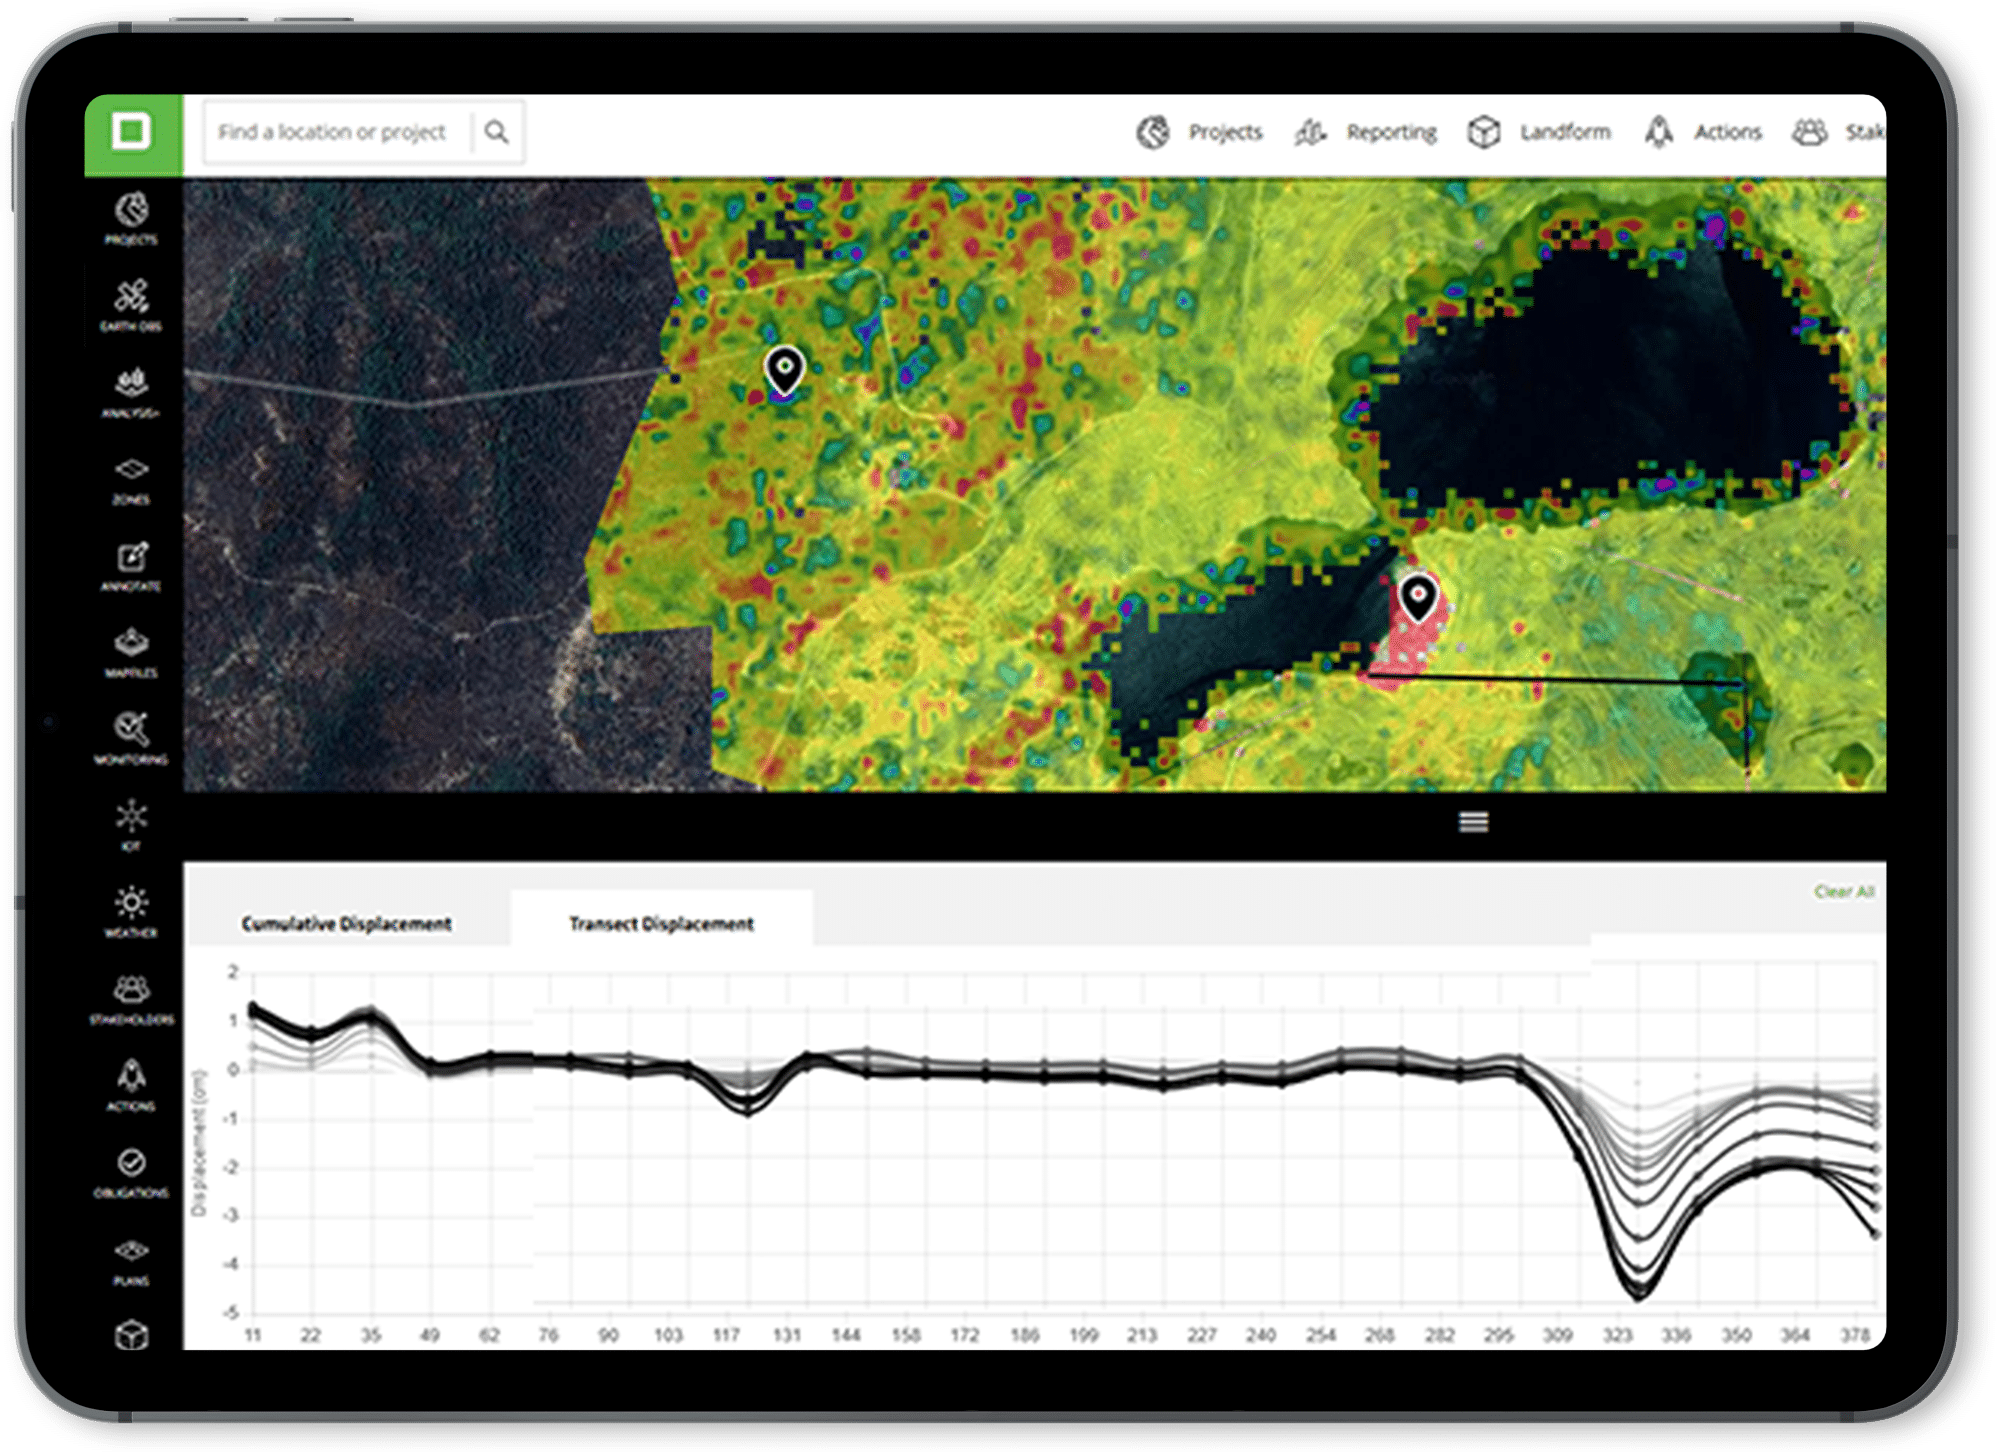 InSAR - Decipher Tailings Monitoring - Wesfarmers